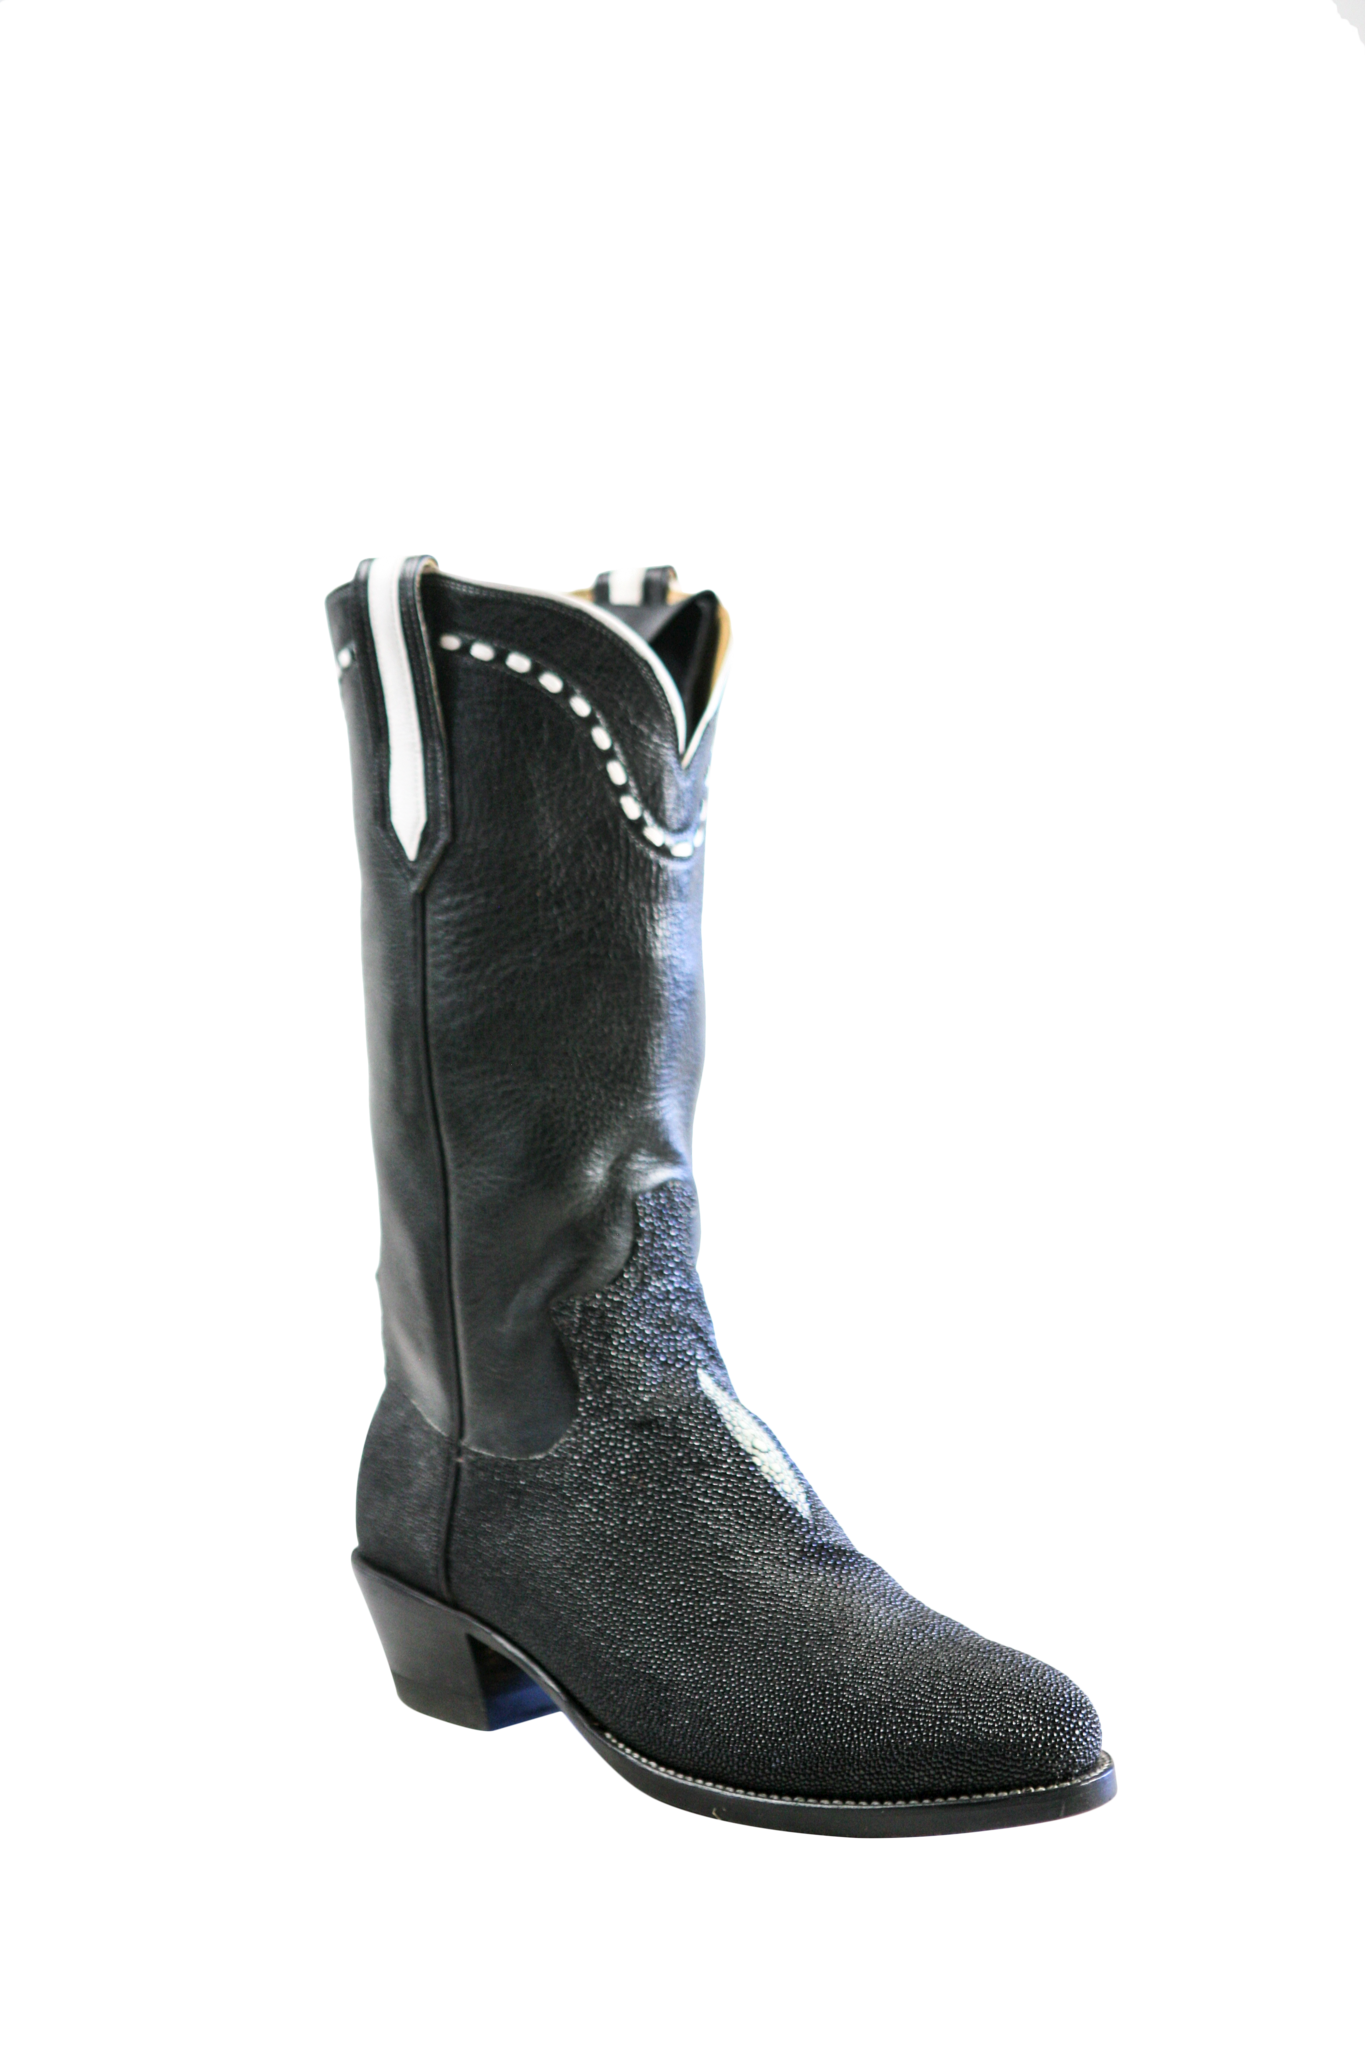 Singles: Boot 0272: Size 10.5B SOLD OUT